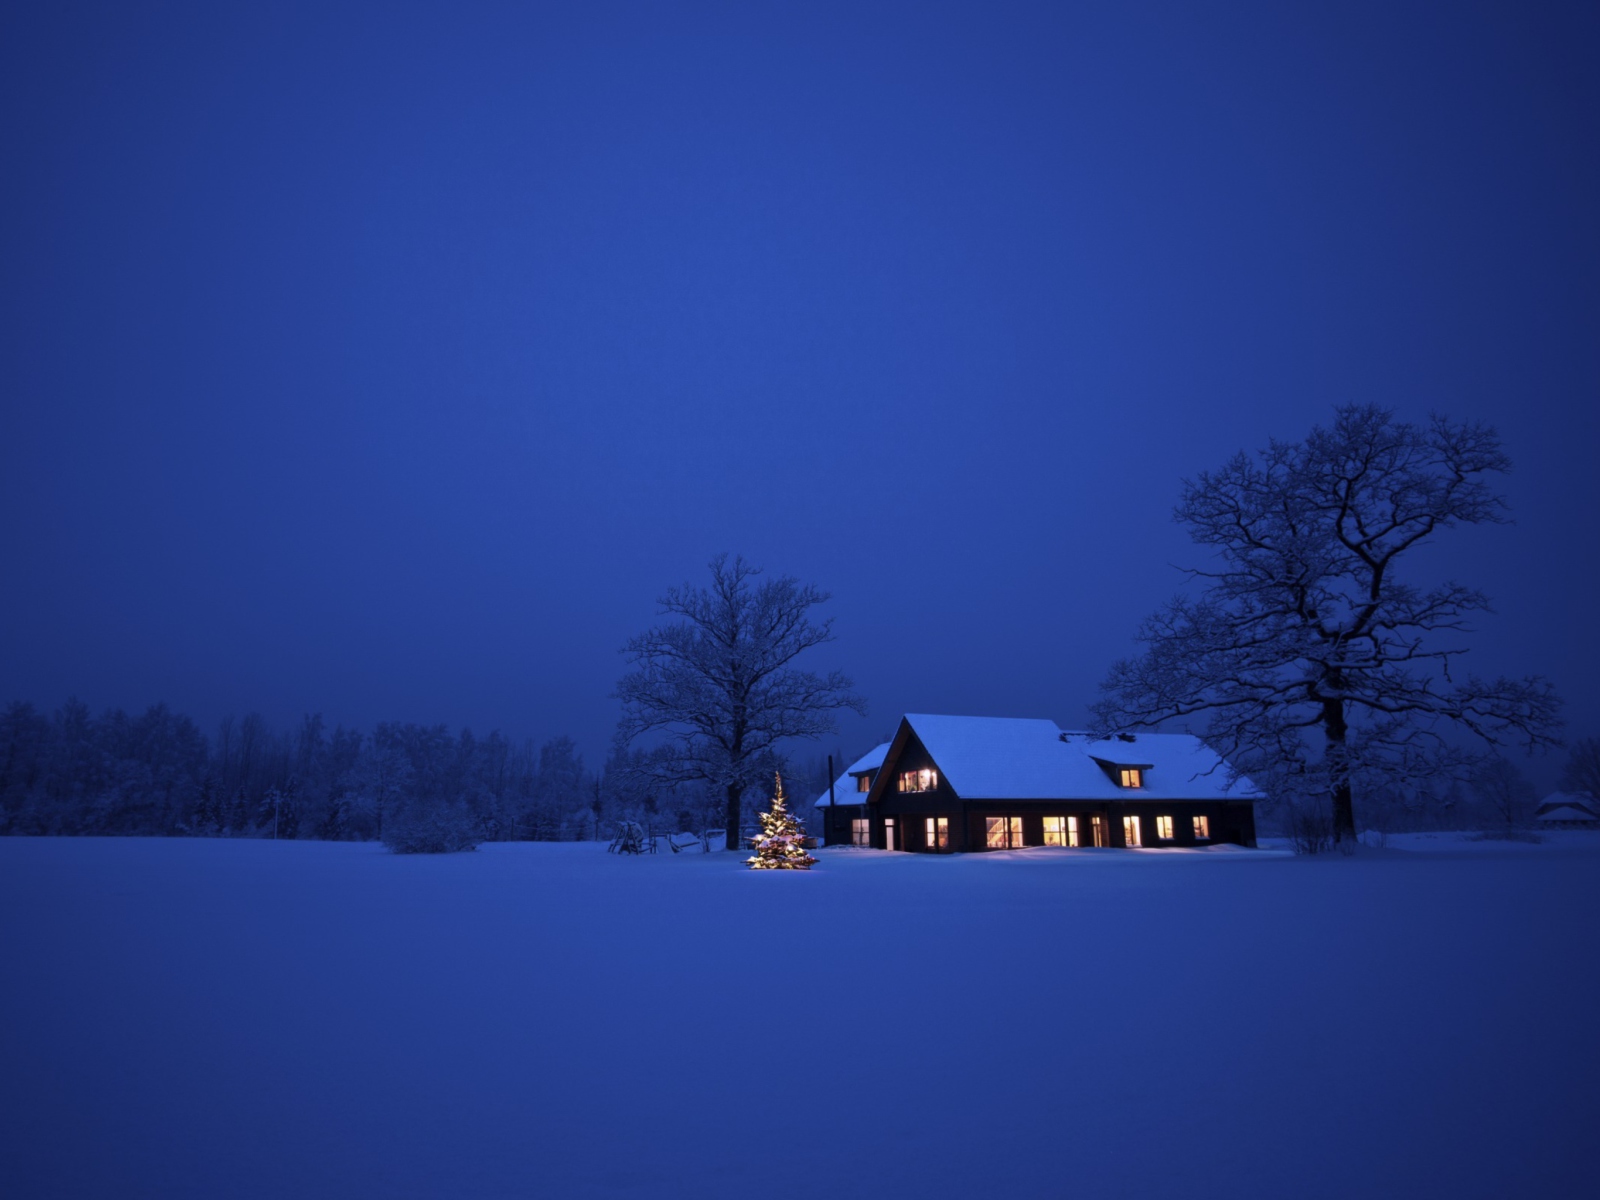 Lonely House, Winter Landscape And Christmas Tree wallpaper 1600x1200